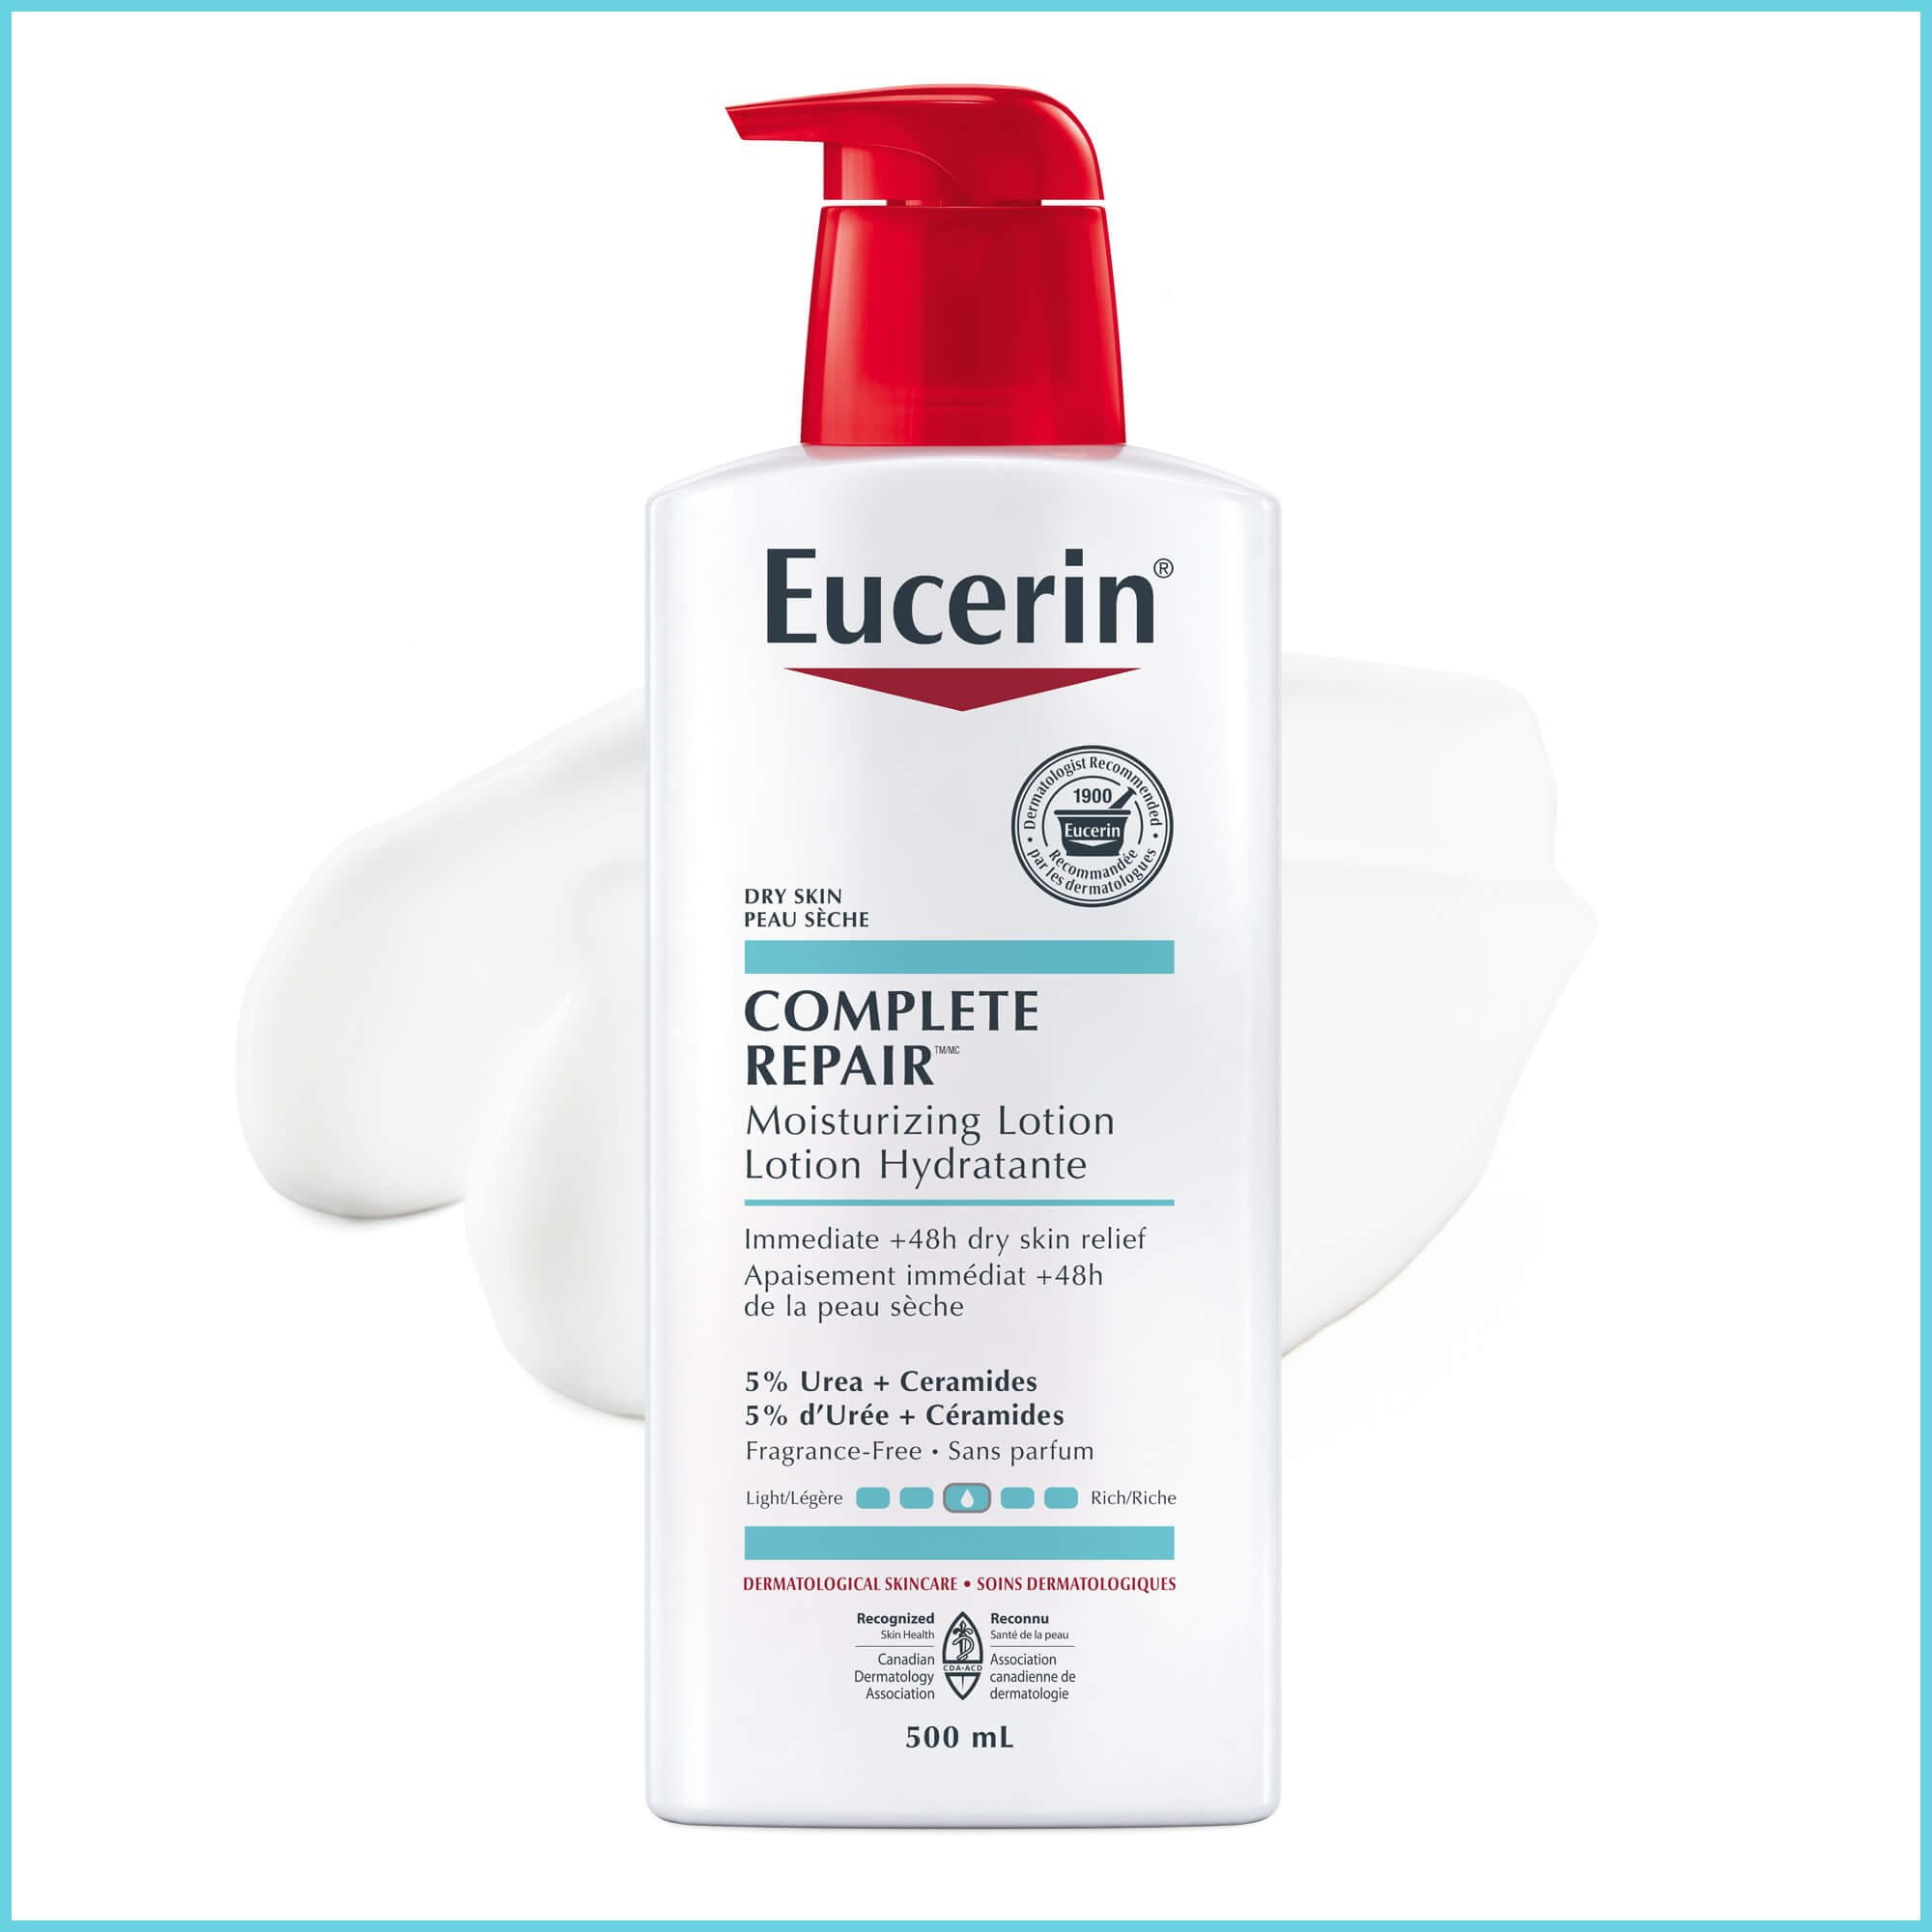 Close up view of 500mL Eucerin Complete Repair moisturizing lotion against a white background with product spread.